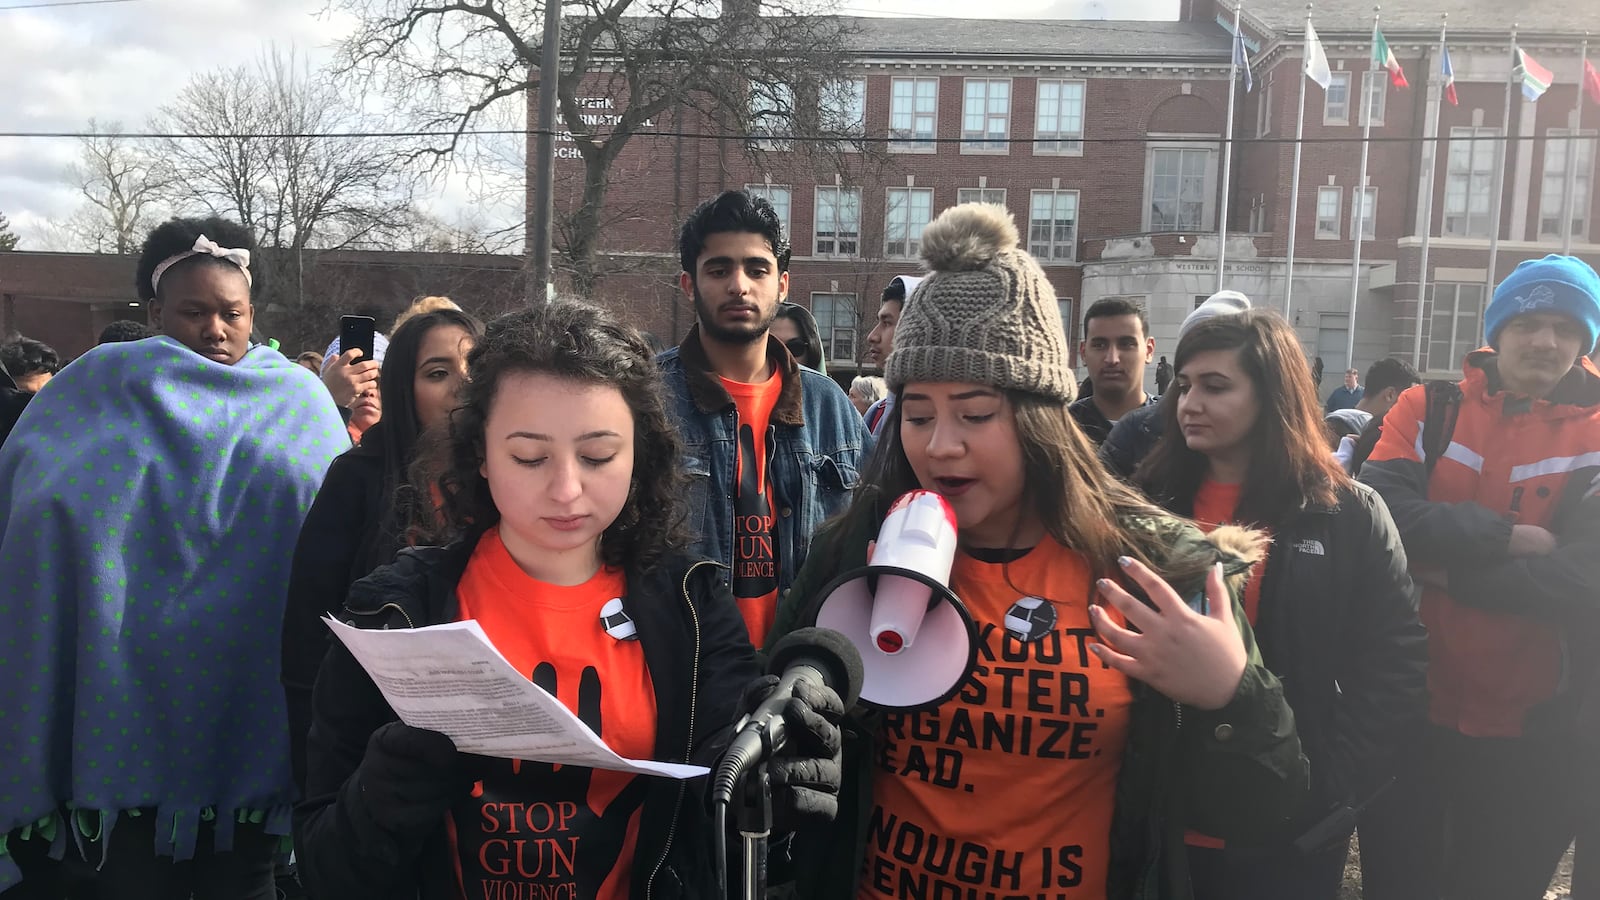 Students at Western International High School gather as part of National Walkout Day, a student-led protest happening across the country.